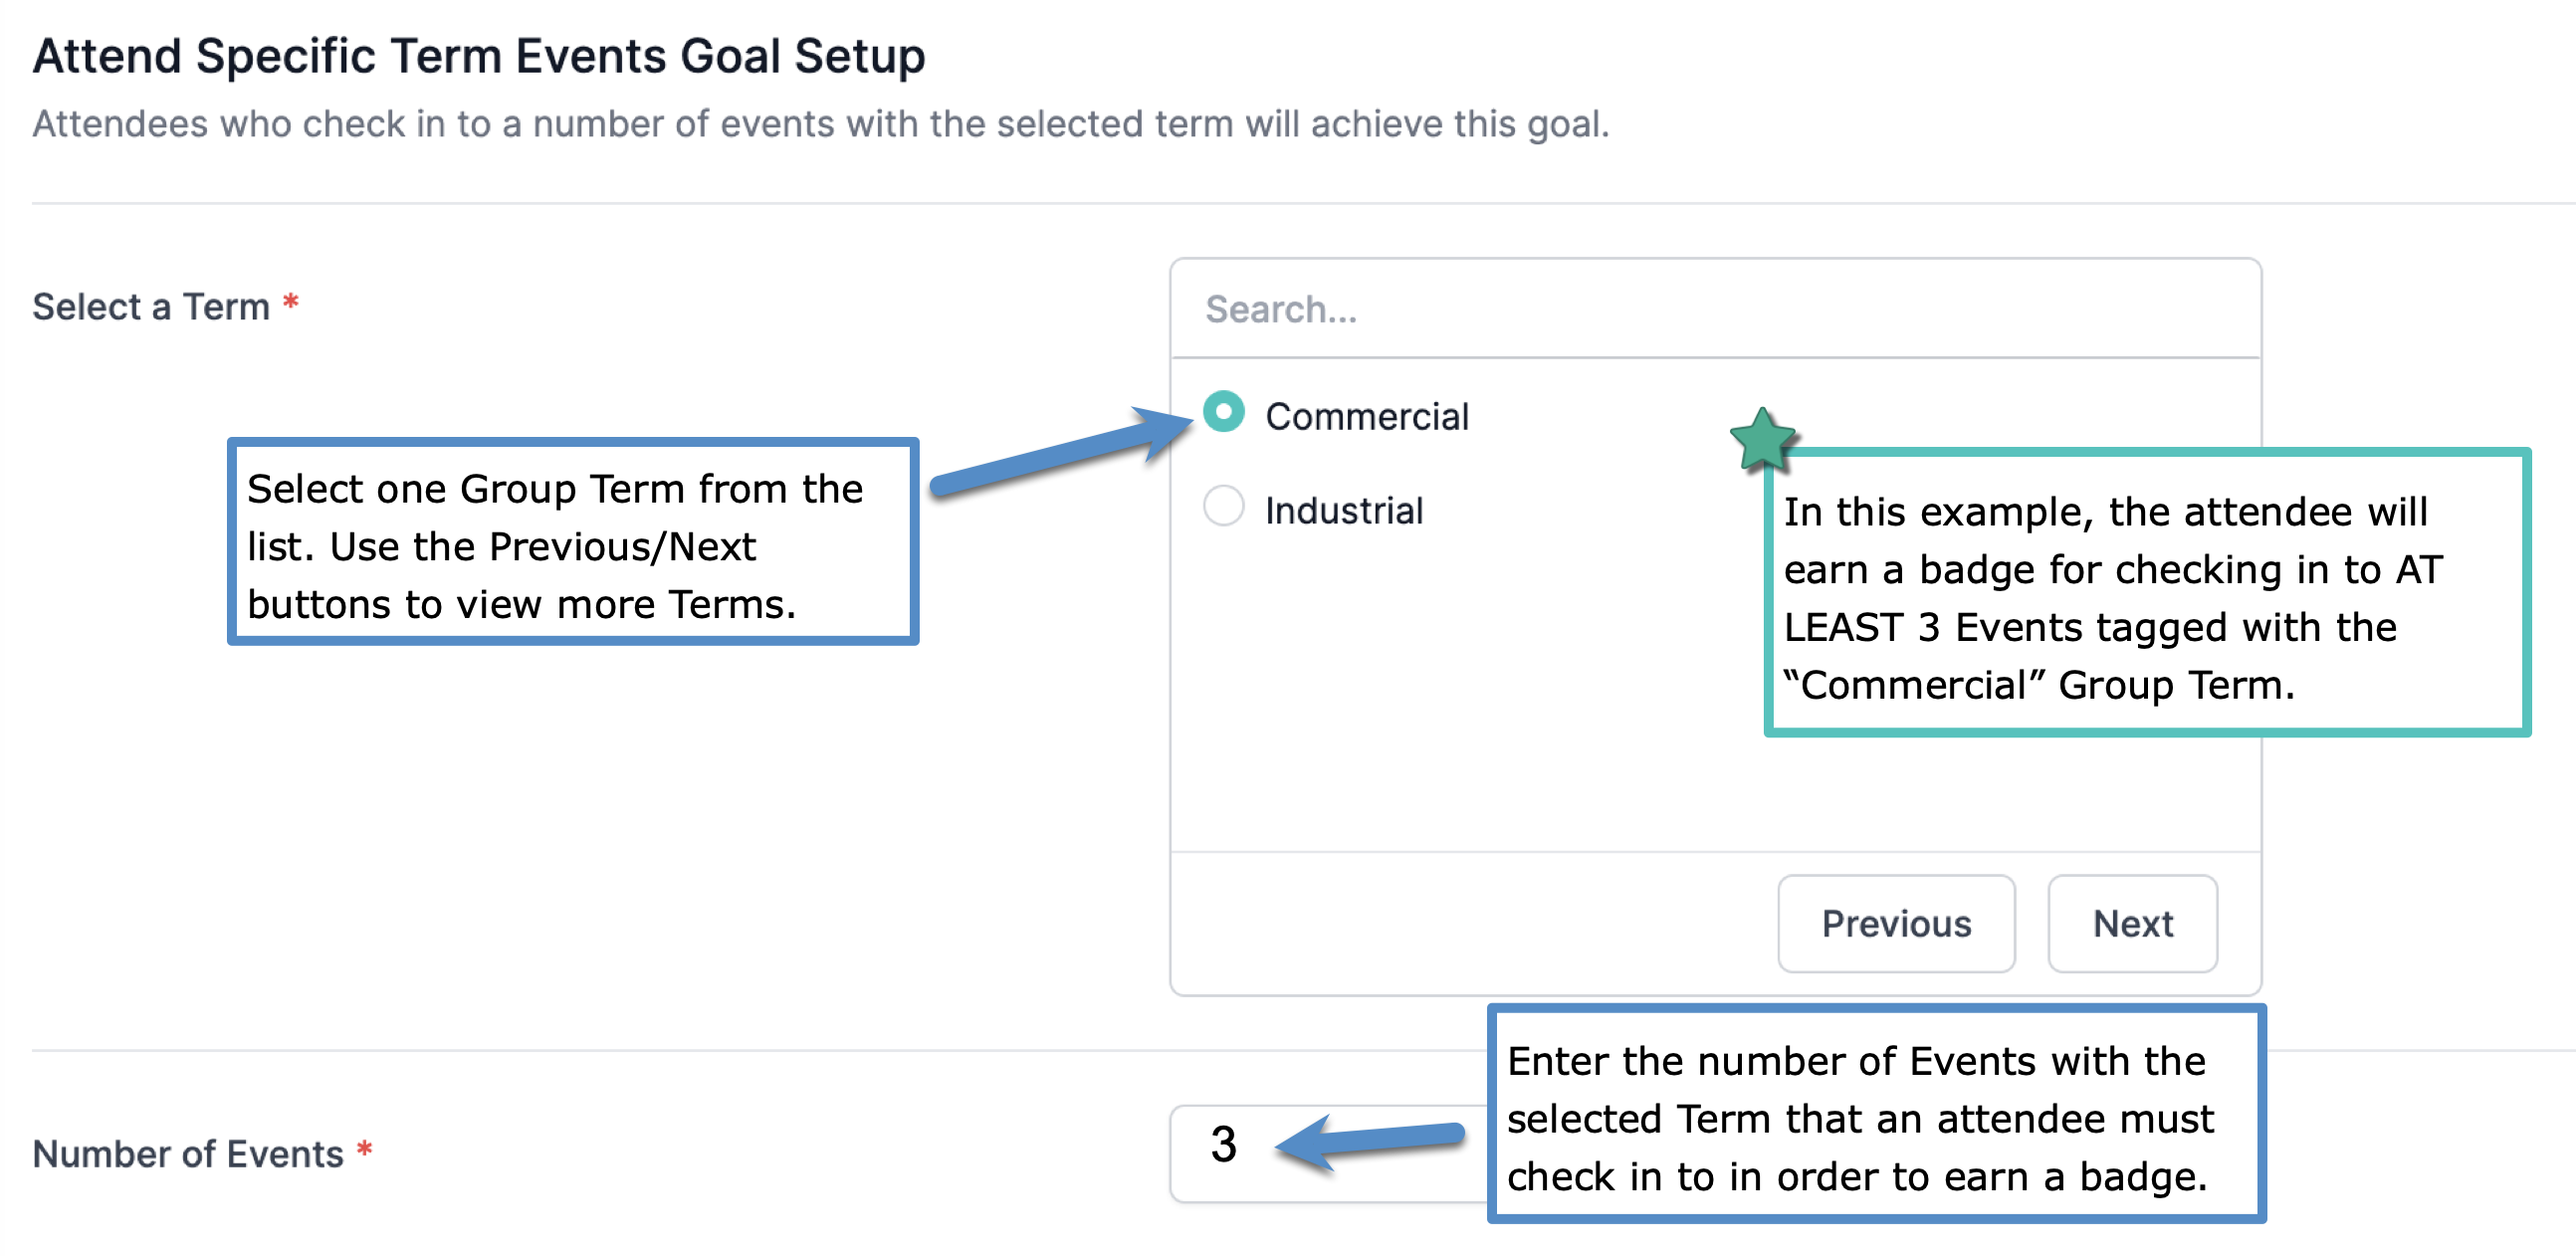 Attend_Specific_Termed_Events_Goal_Setup.png